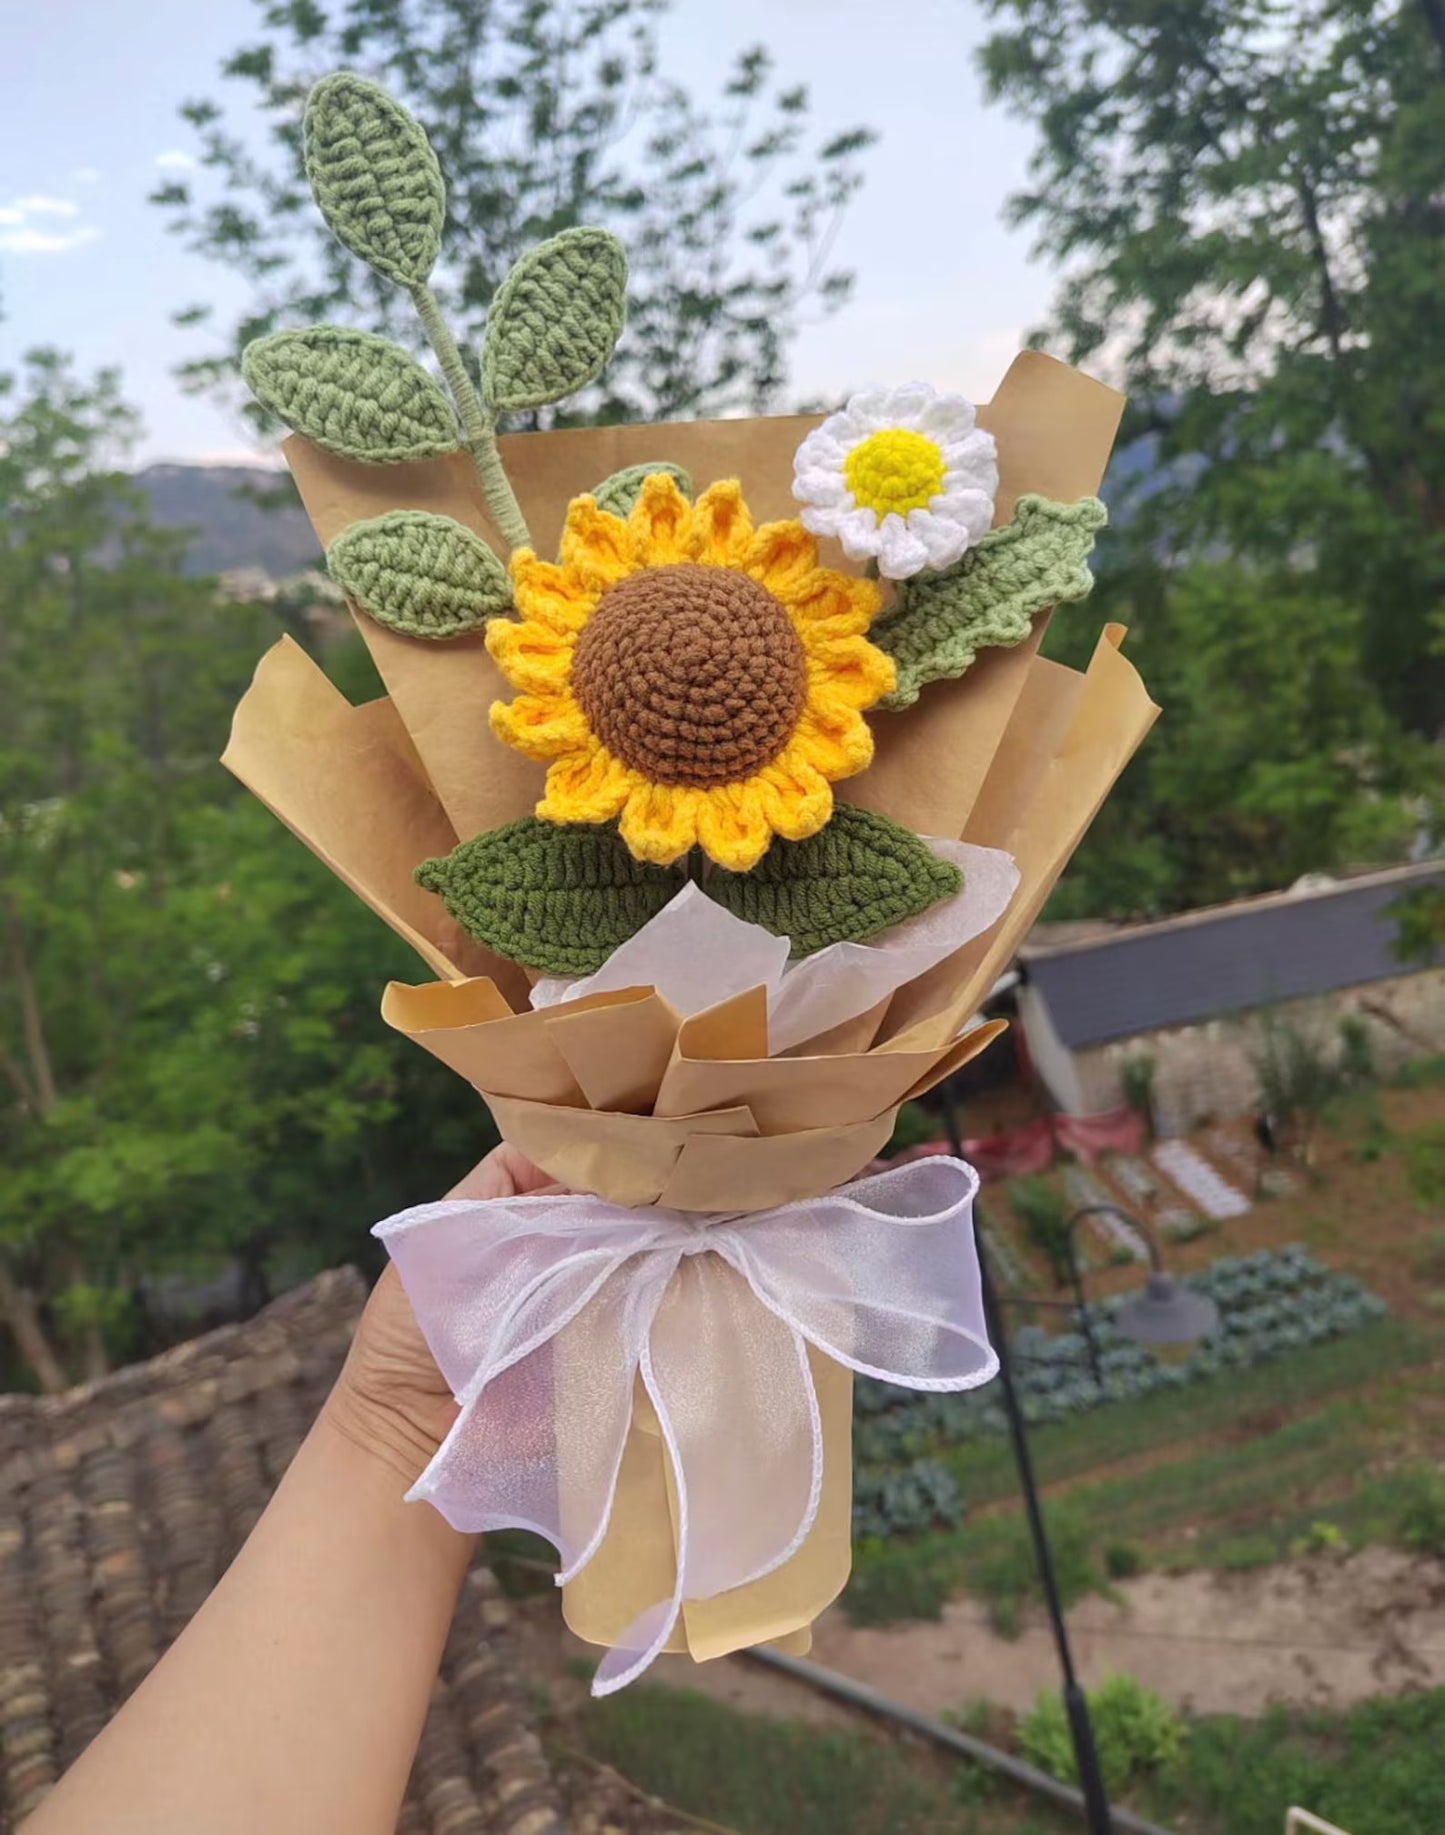 Crochet Sunflower Bouquet Mixed with Daisy&Green Leaves